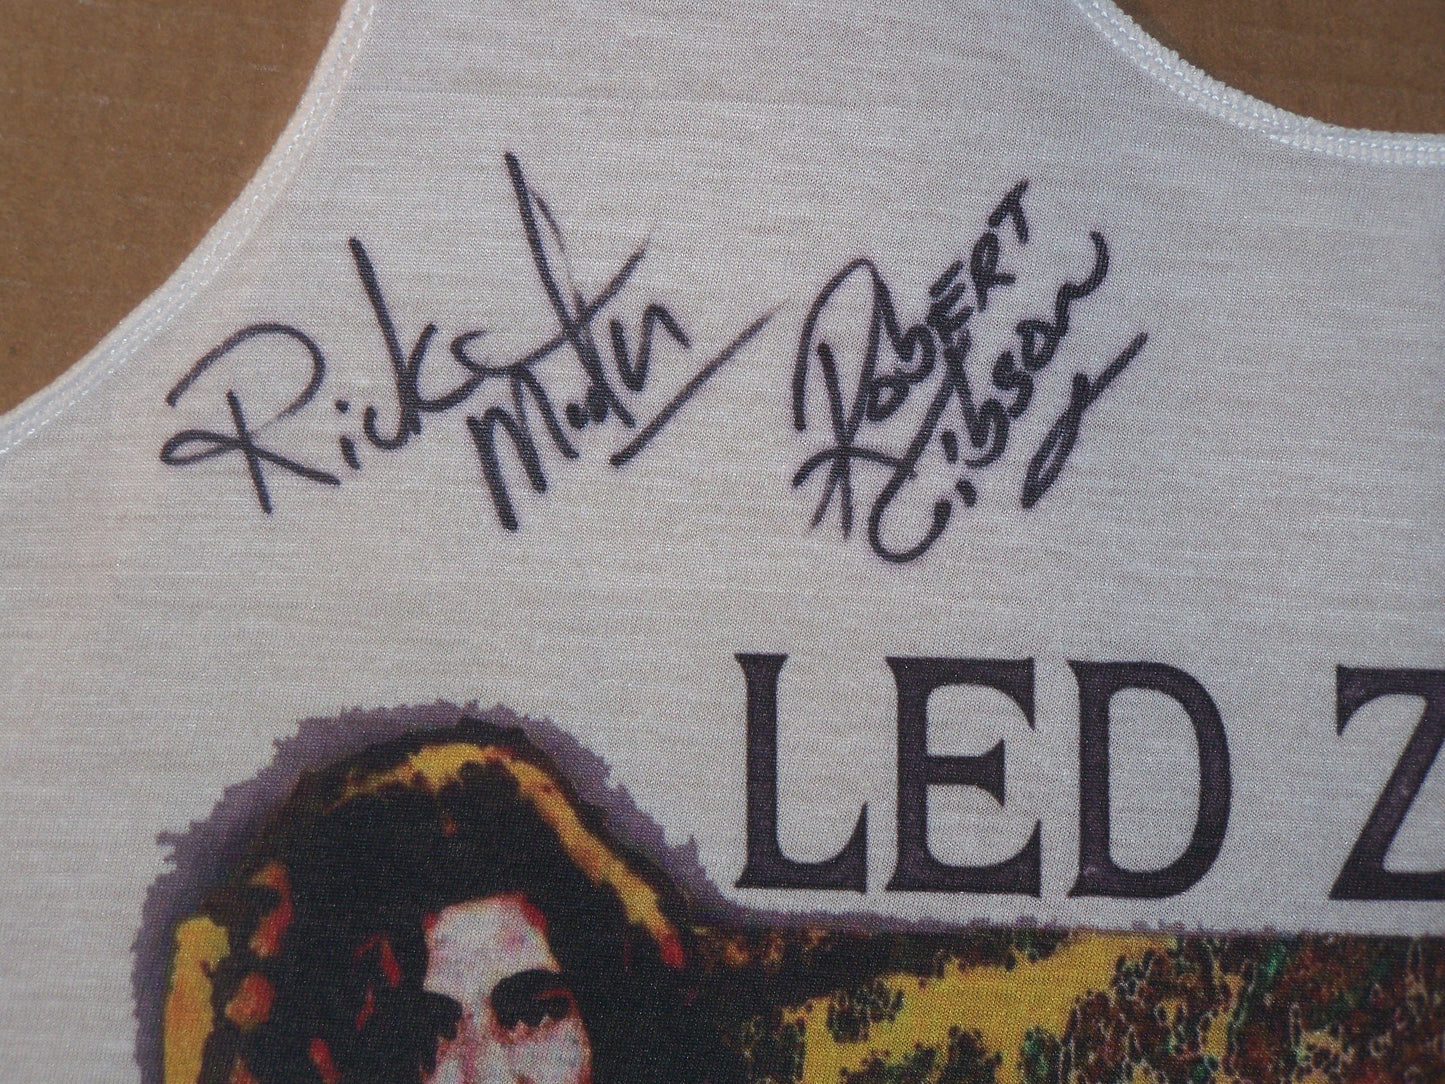 A33  Led Zeppelin Tank Top Tee Shirt Autographed  by the Rock and Roll Express